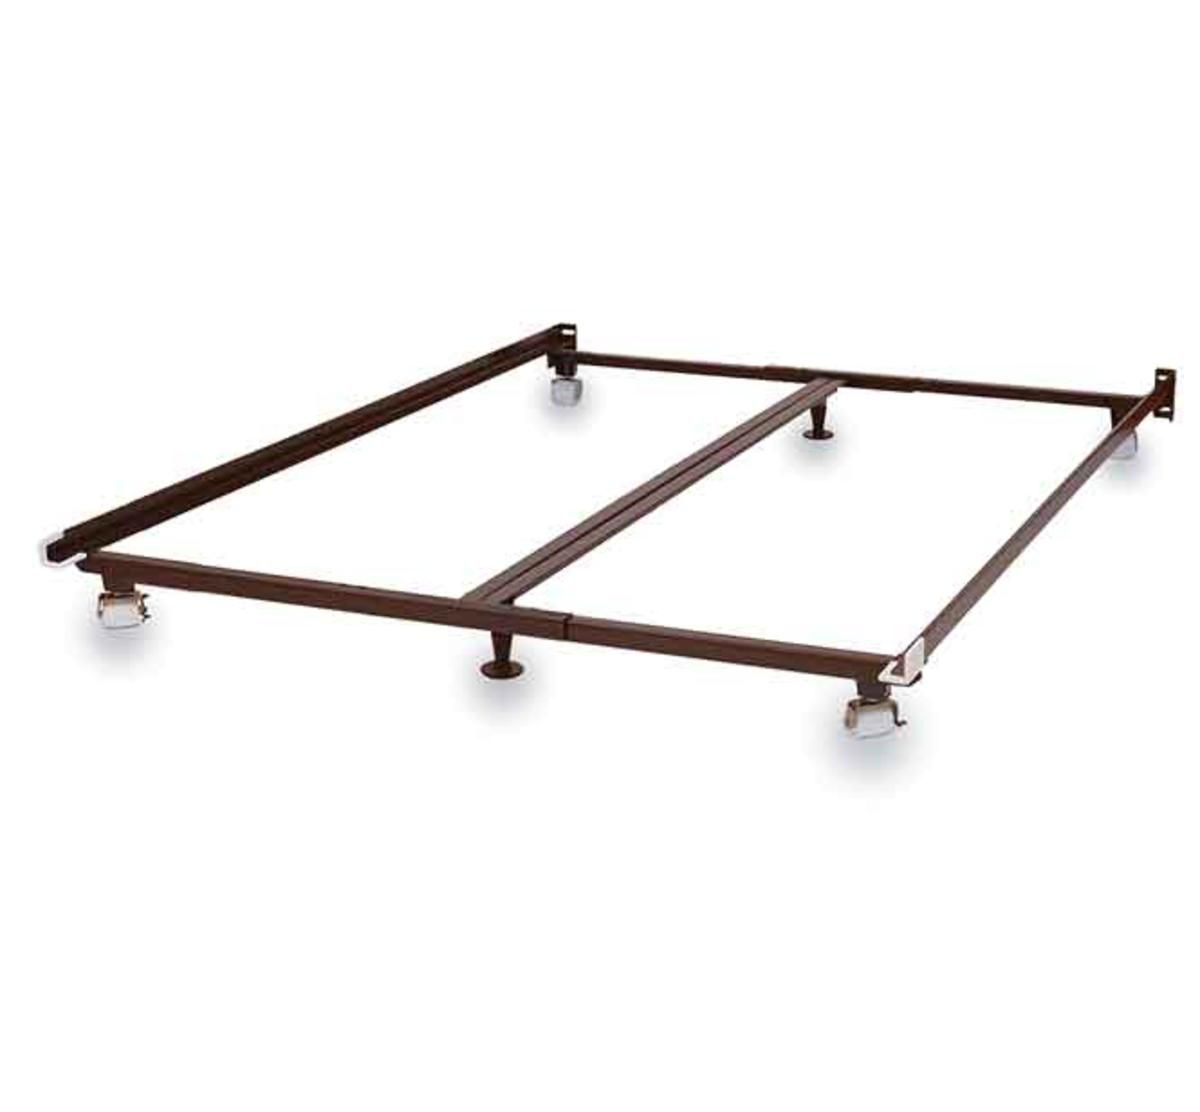 Low Profile Universal Bed Frame, Low Profile Queen Size Metal Bed Frame